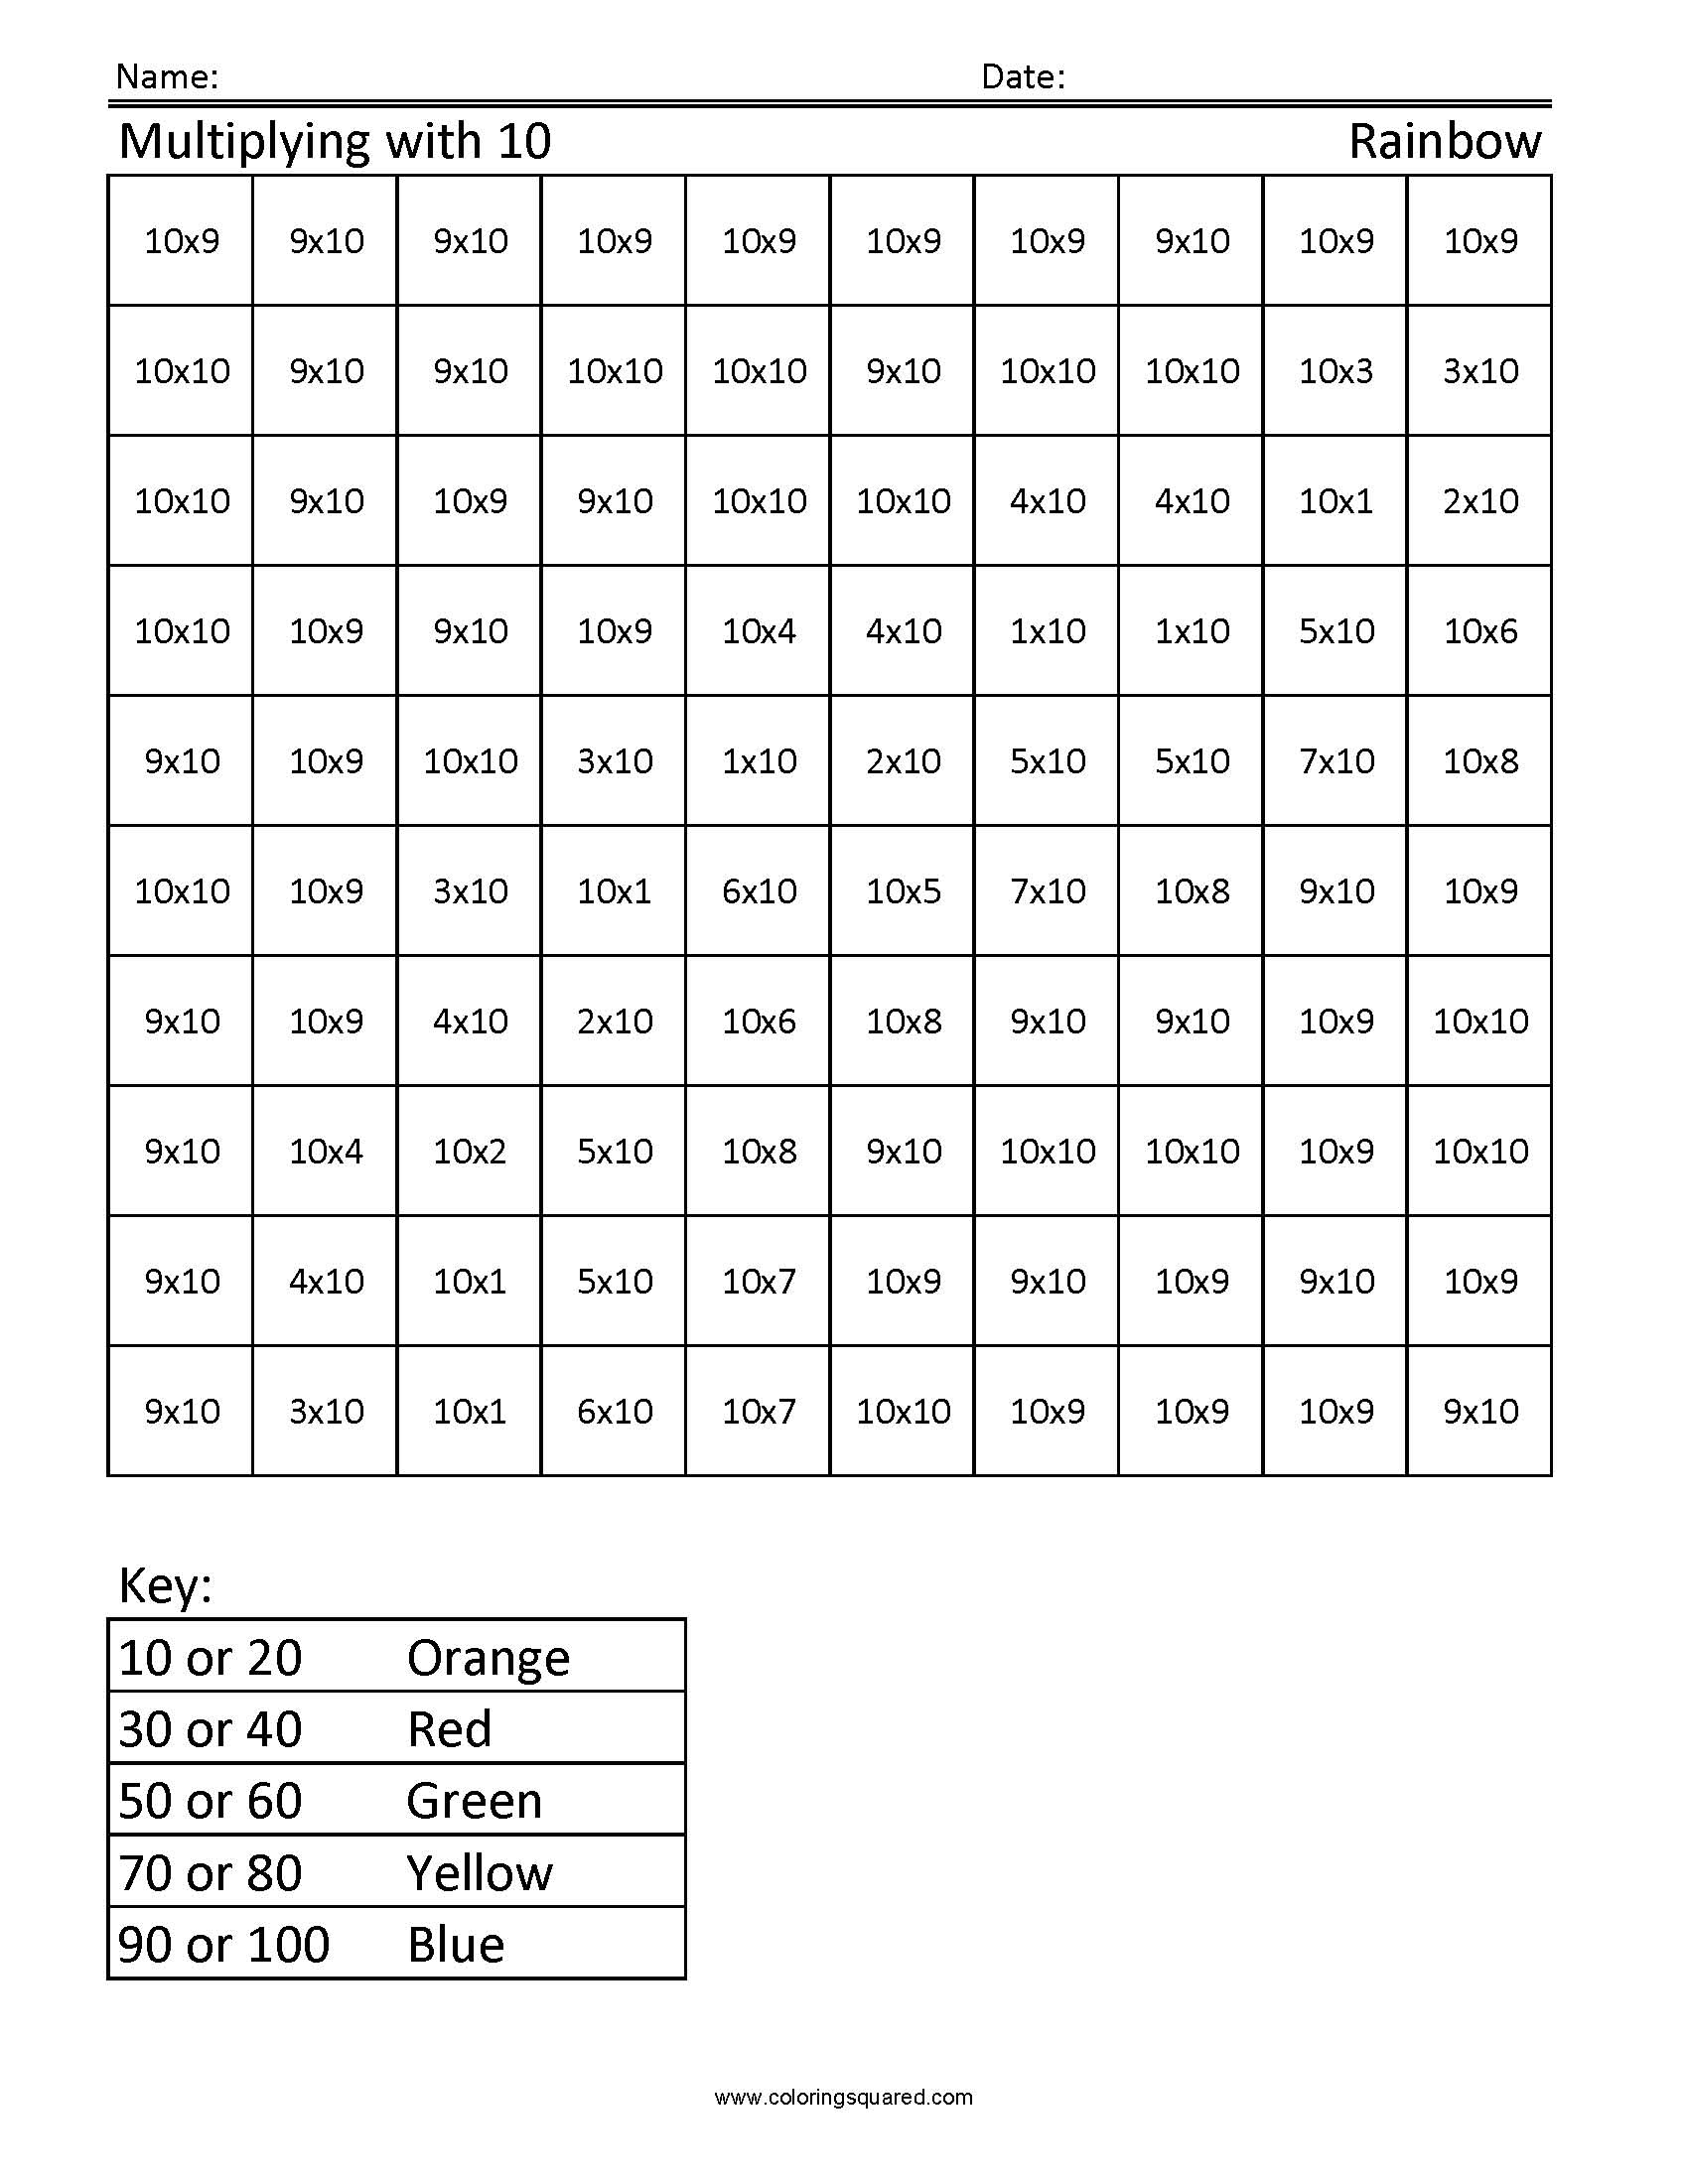 Multiplication Table Coloring Sheet Image